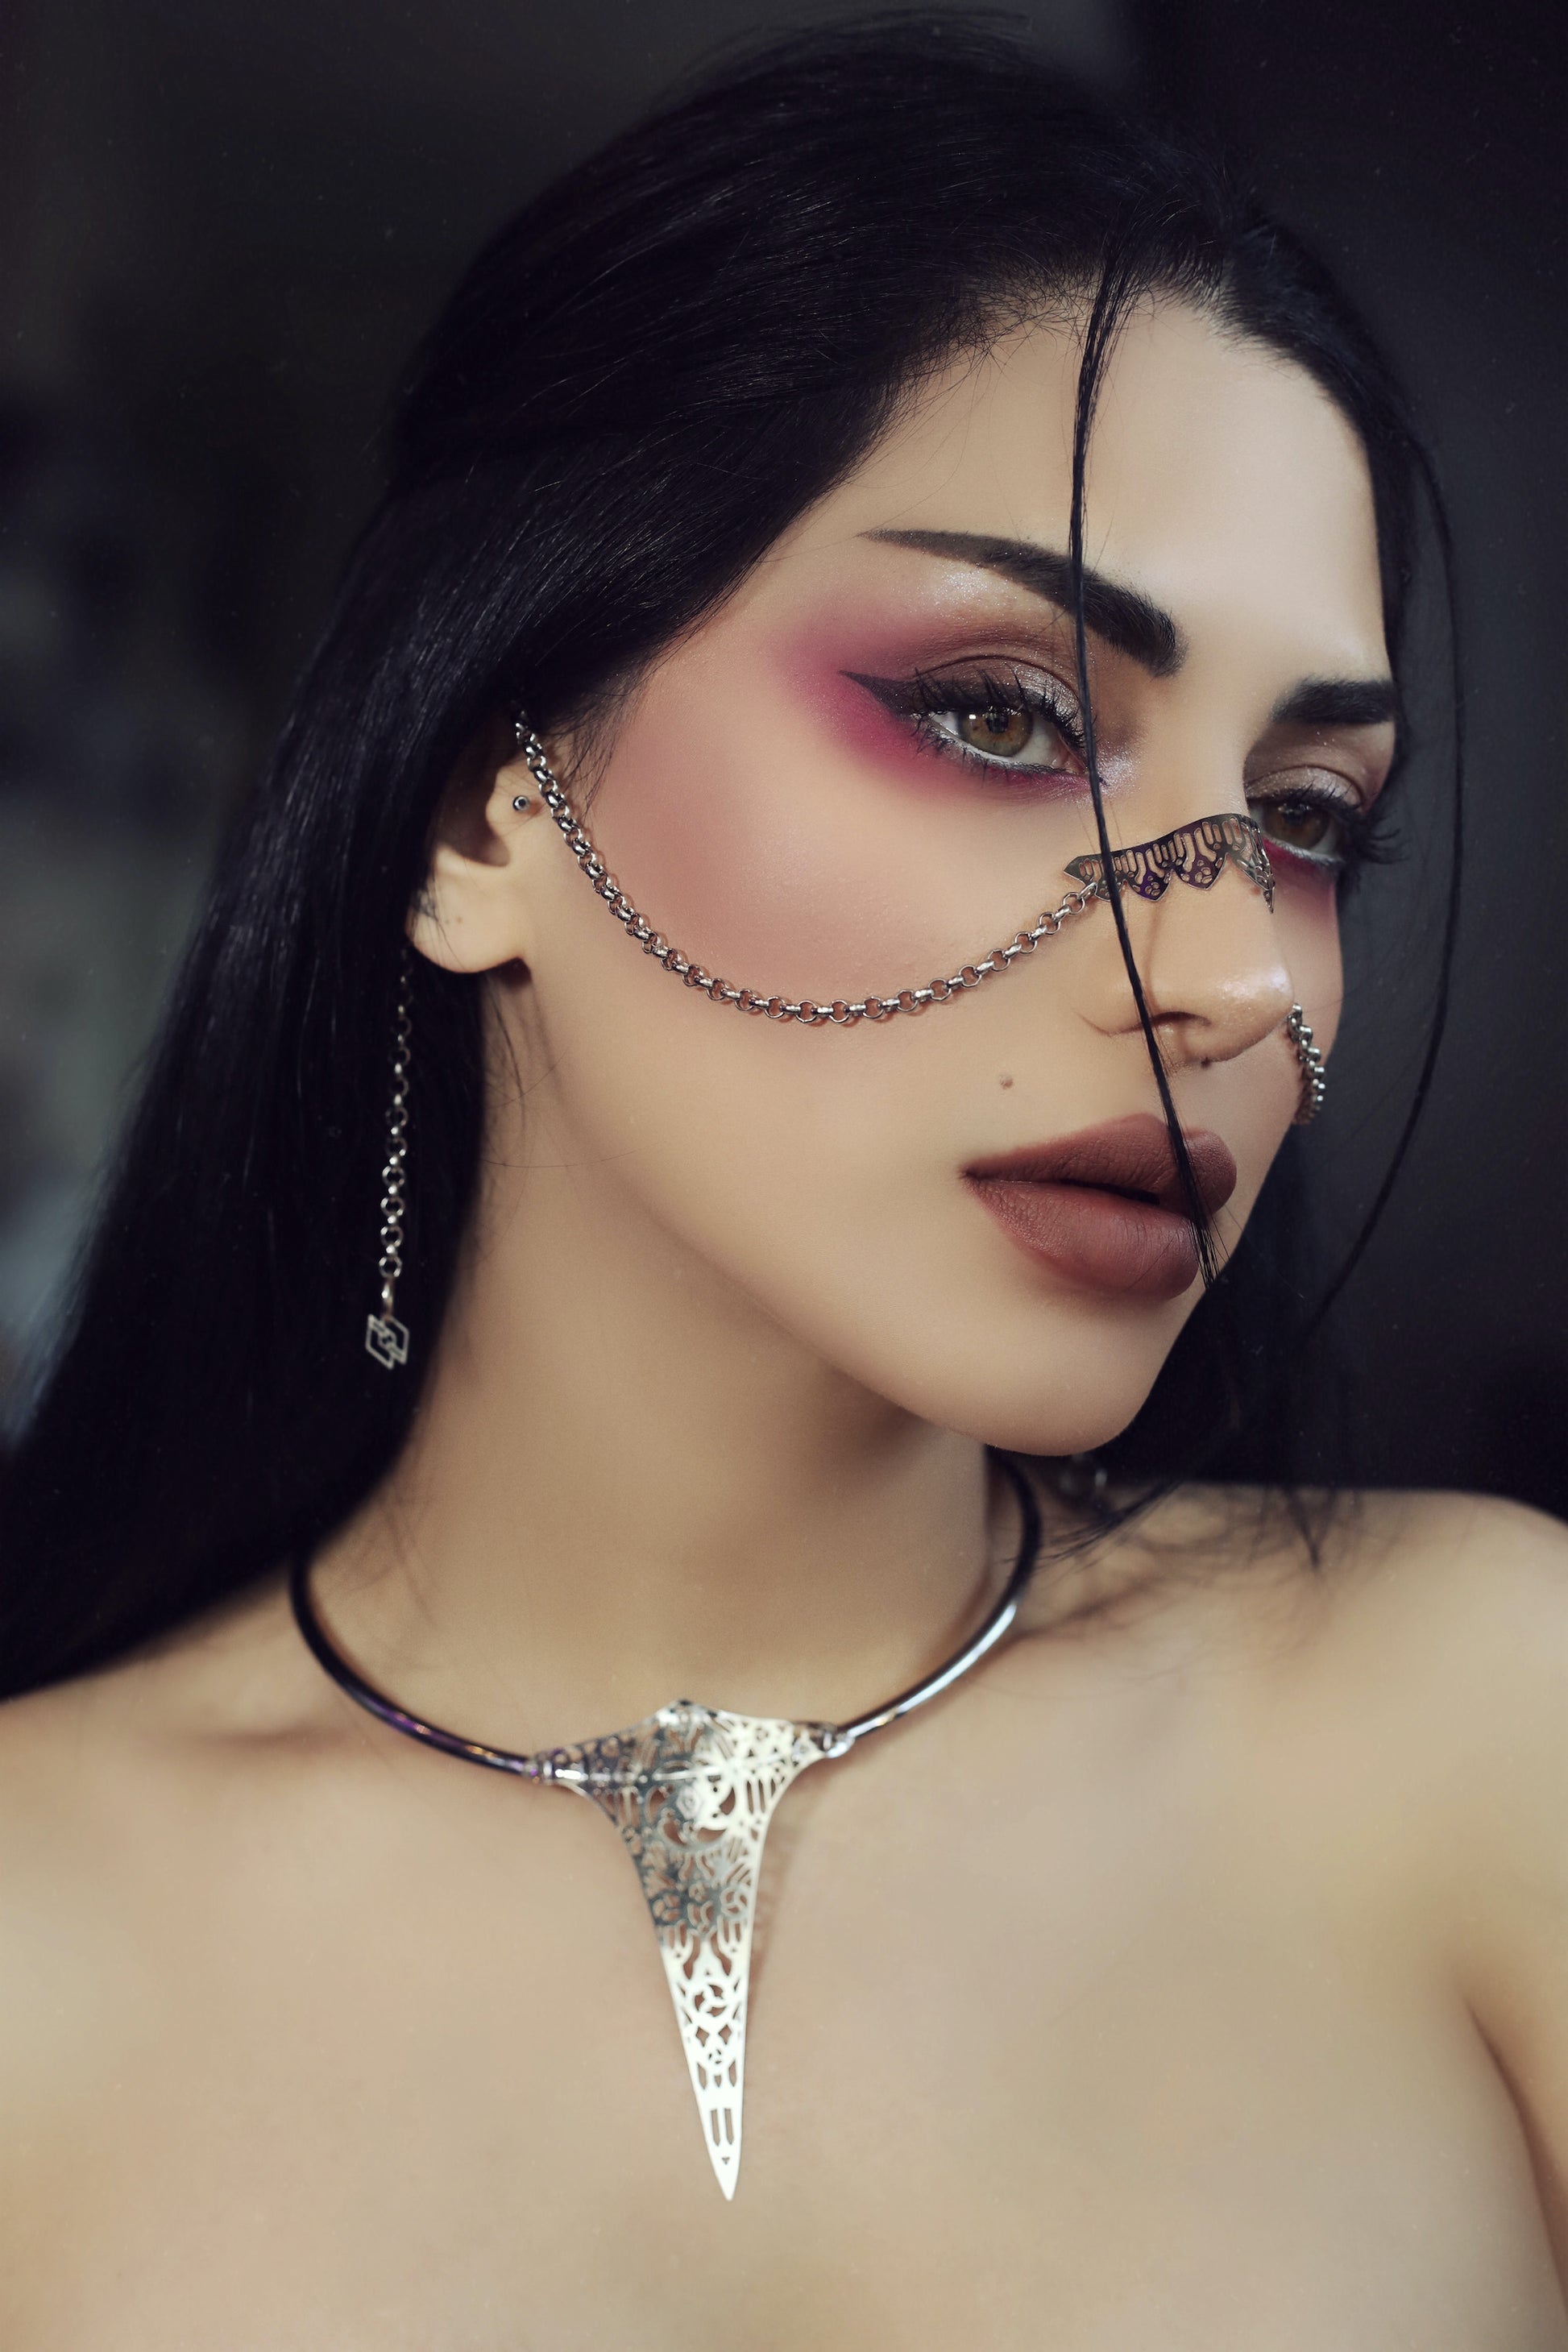 A model showcases a Myril Jewels rigid V-shape necklace featuring a gothic church motif, embodying the brand's dark-avantgarde style, ideal for gothic-chic aficionados